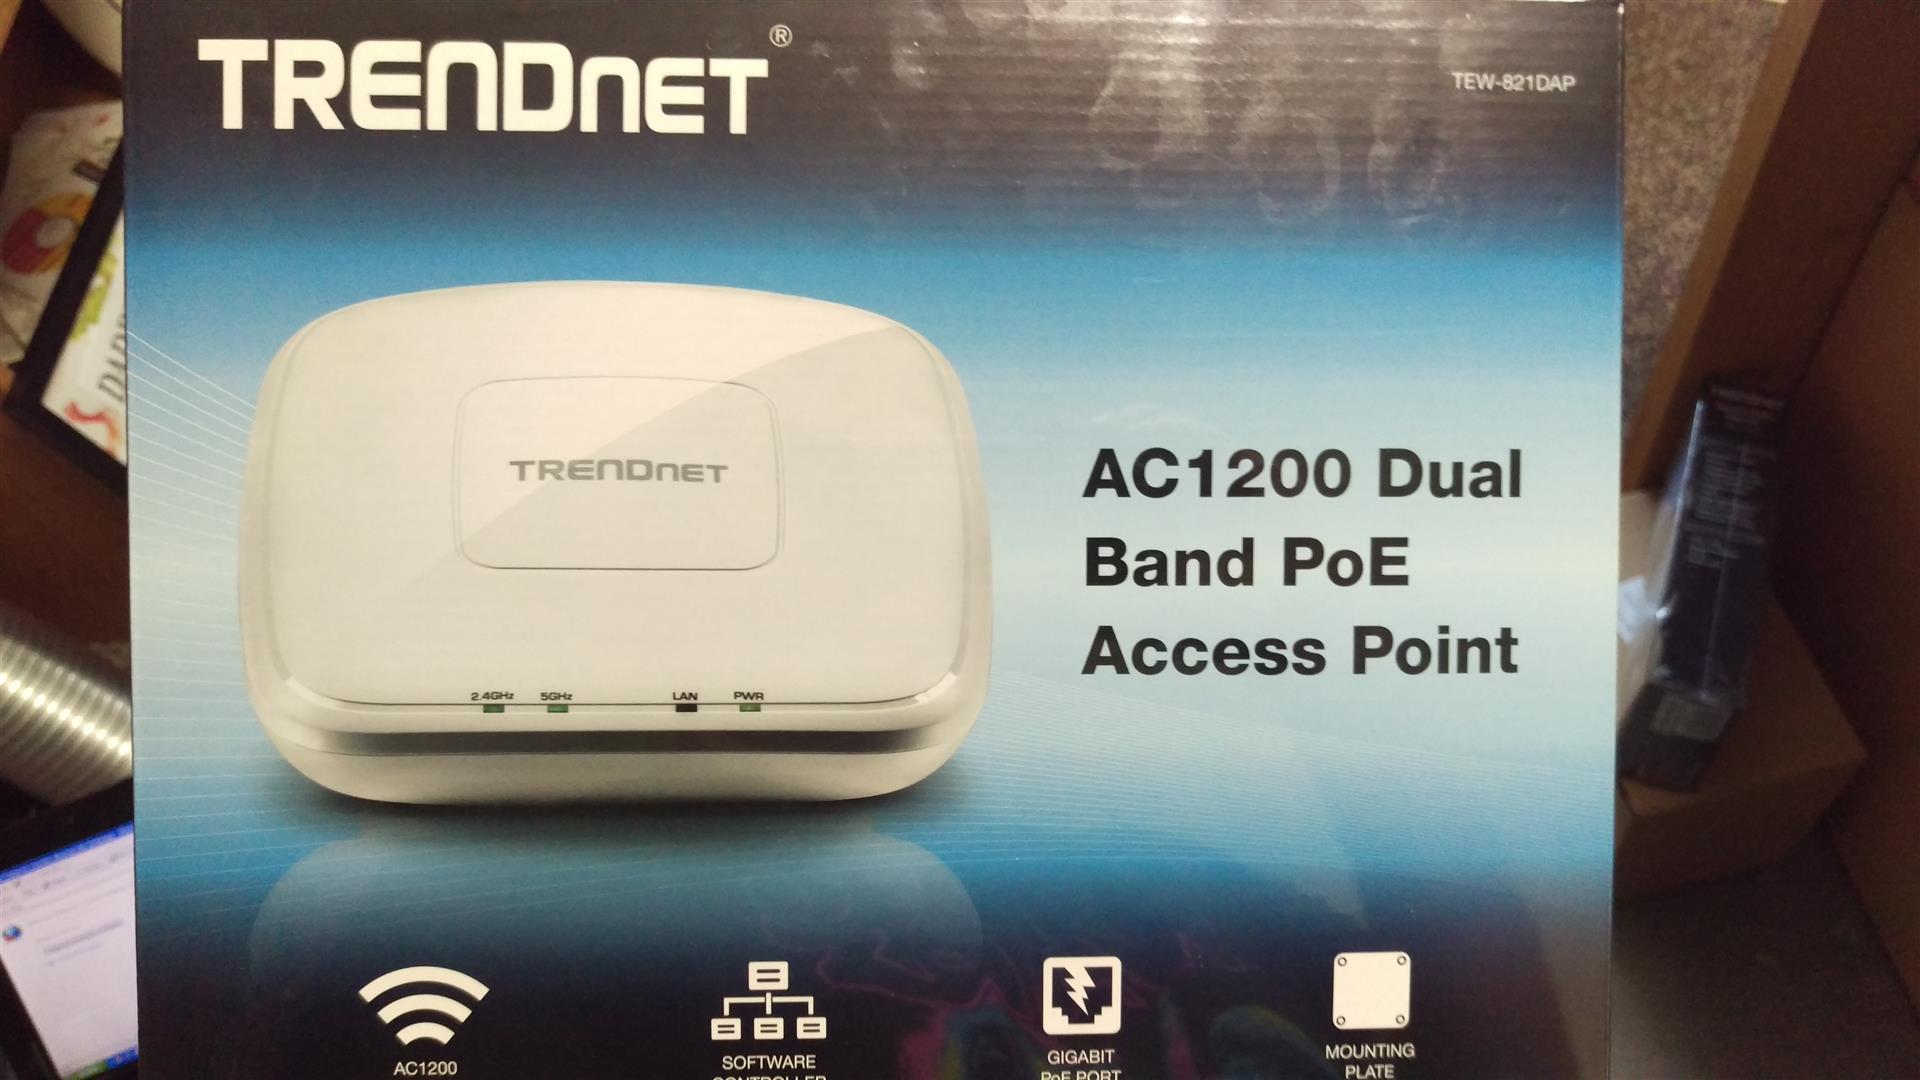 TRENDnet AC1200 Dual Band PoE Access Point